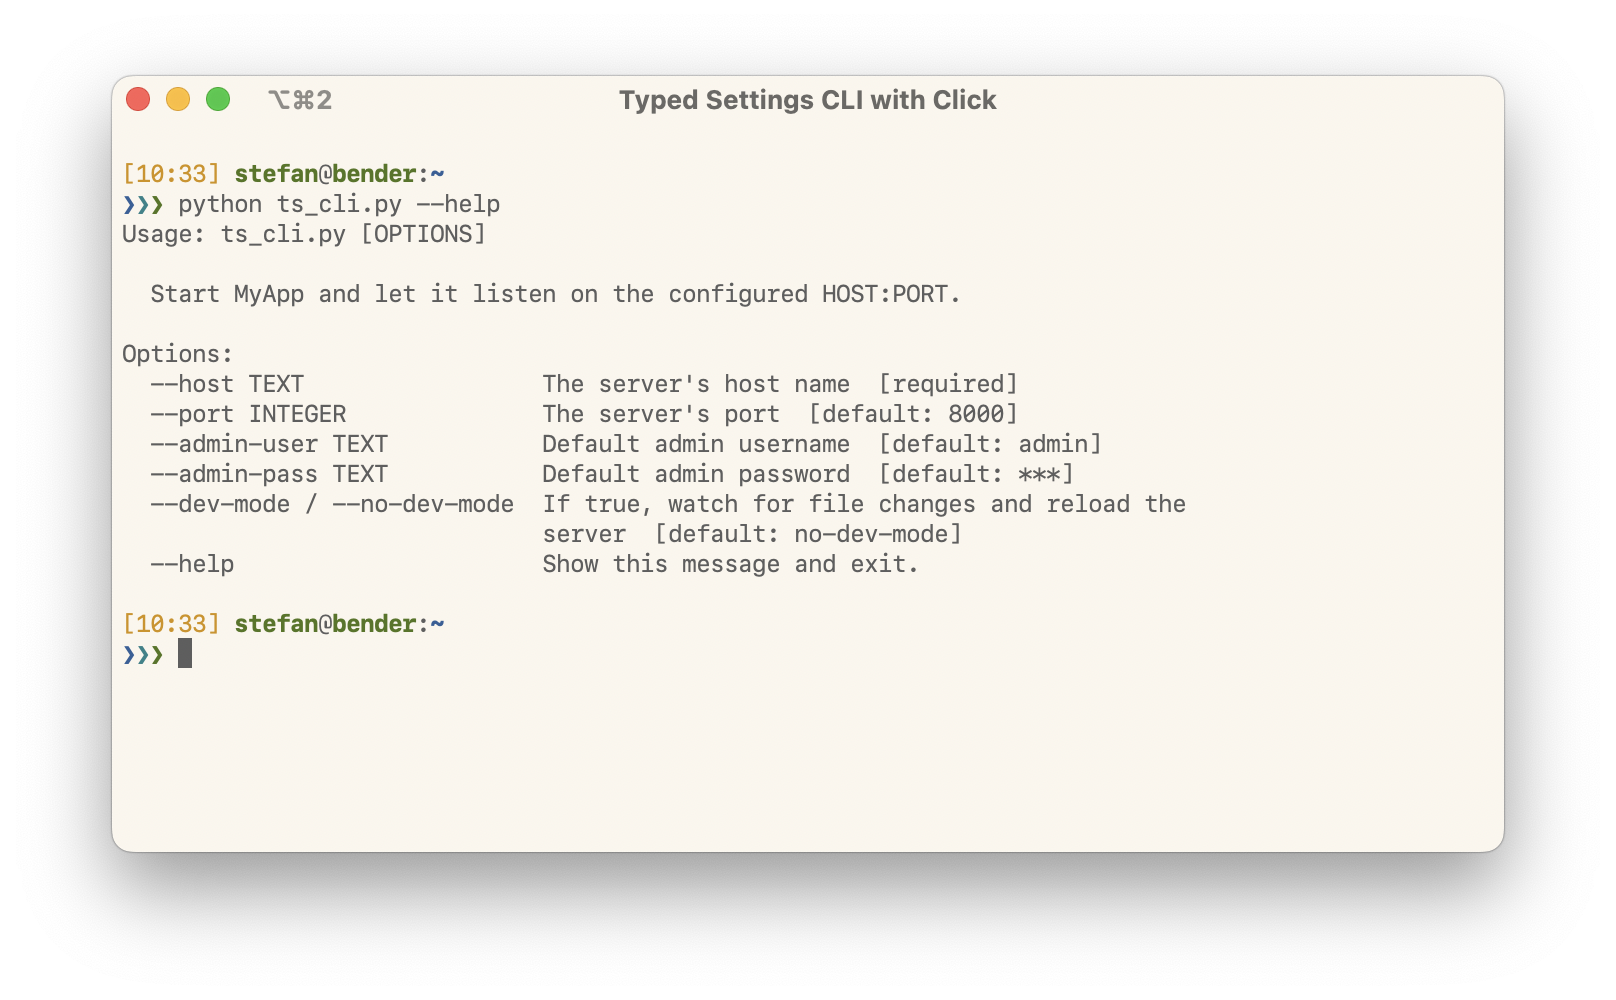 "--help" output of a "Click" based Typed Settings CLI